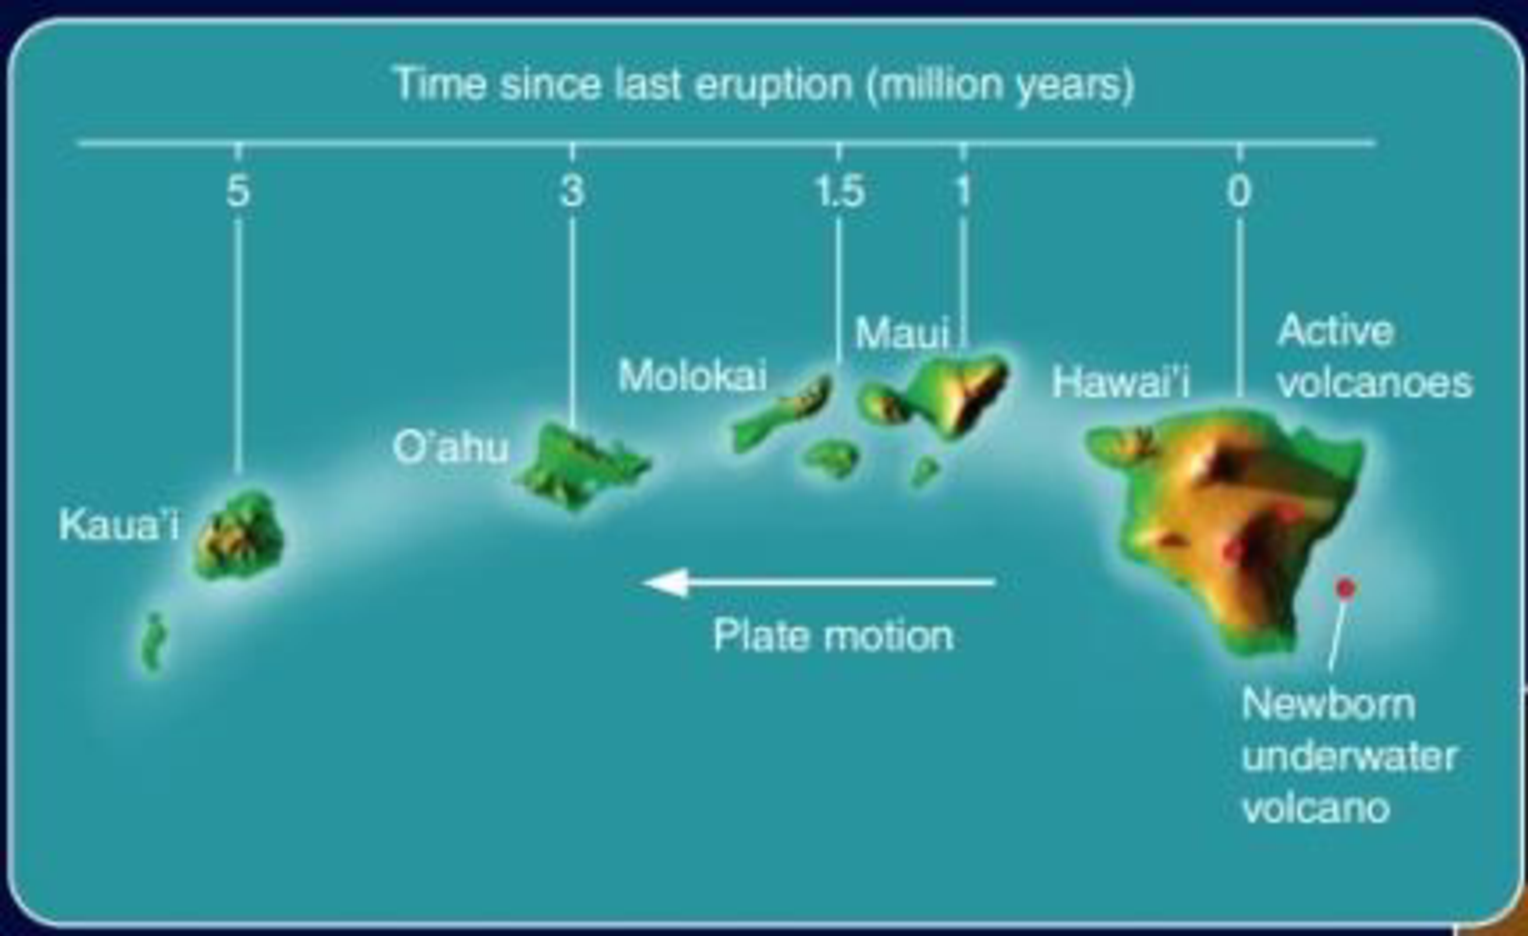 Chapter 21, Problem 2LTL, Look at the map of the Hawaiian chain of islands on the right-hand page of the Concept Art: 